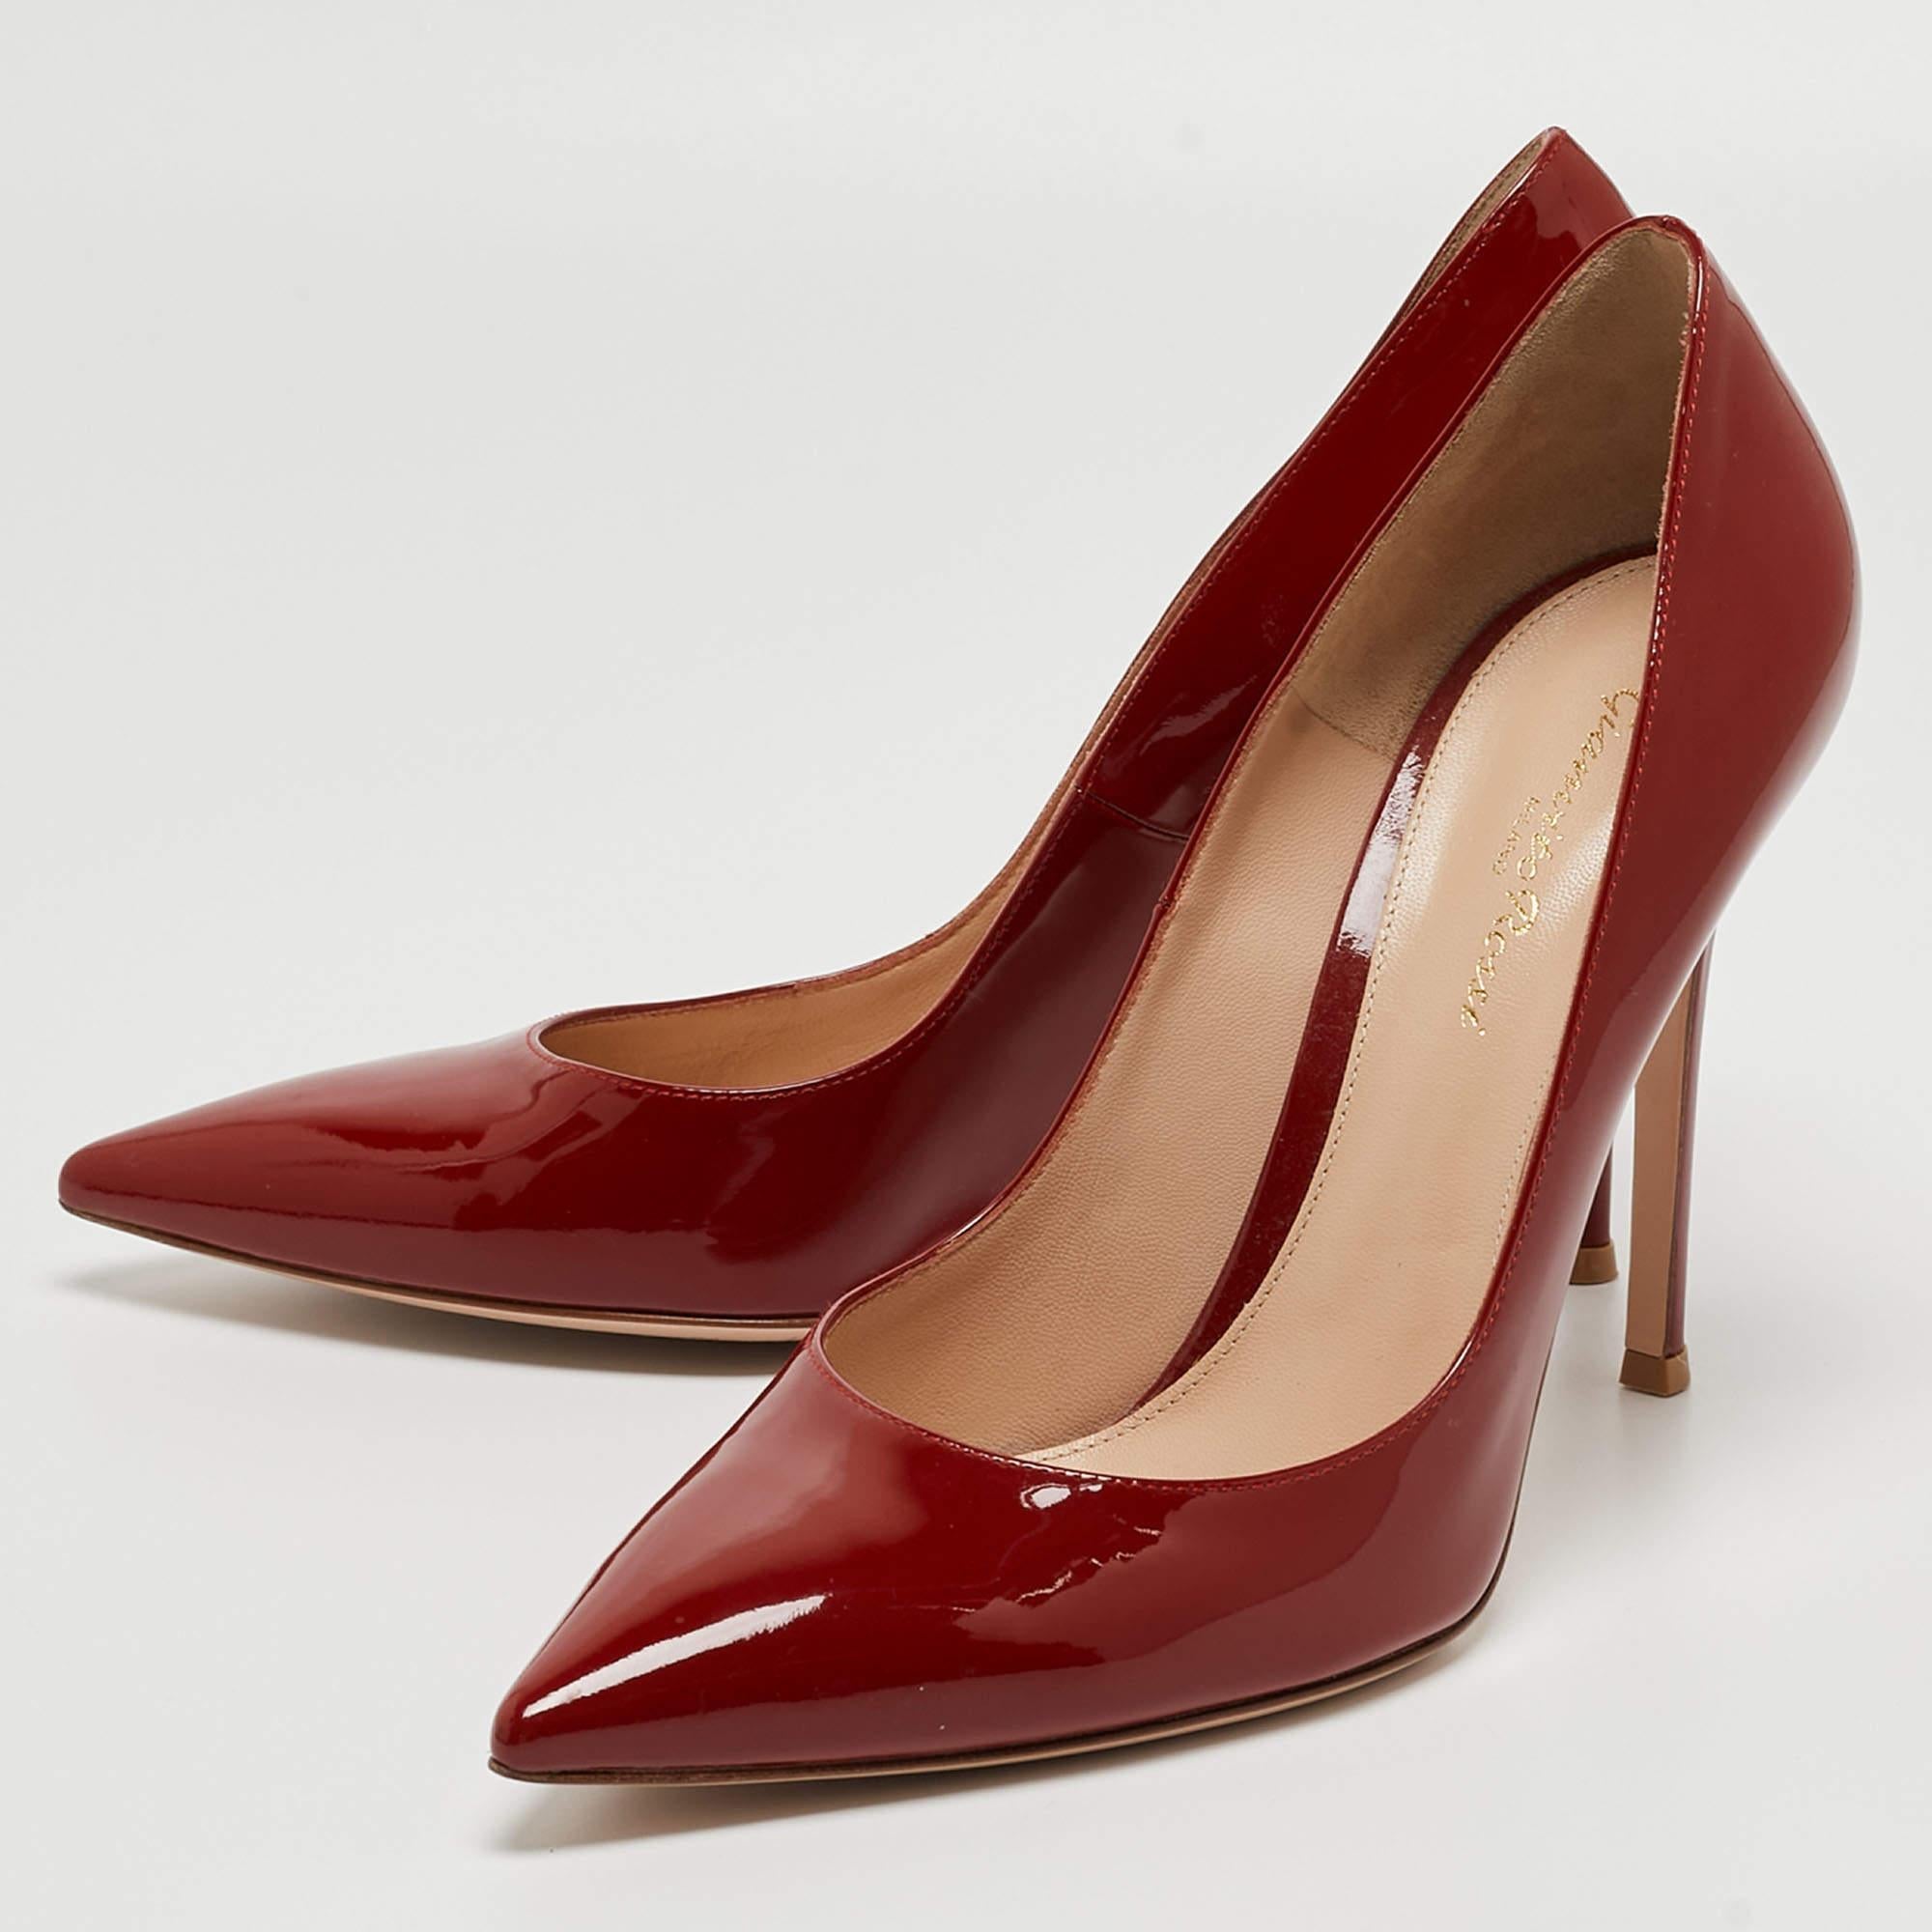 Gianvito Rossi Dark Red Patent Leather Pointed Toe Pumps Size 41 For Sale 3